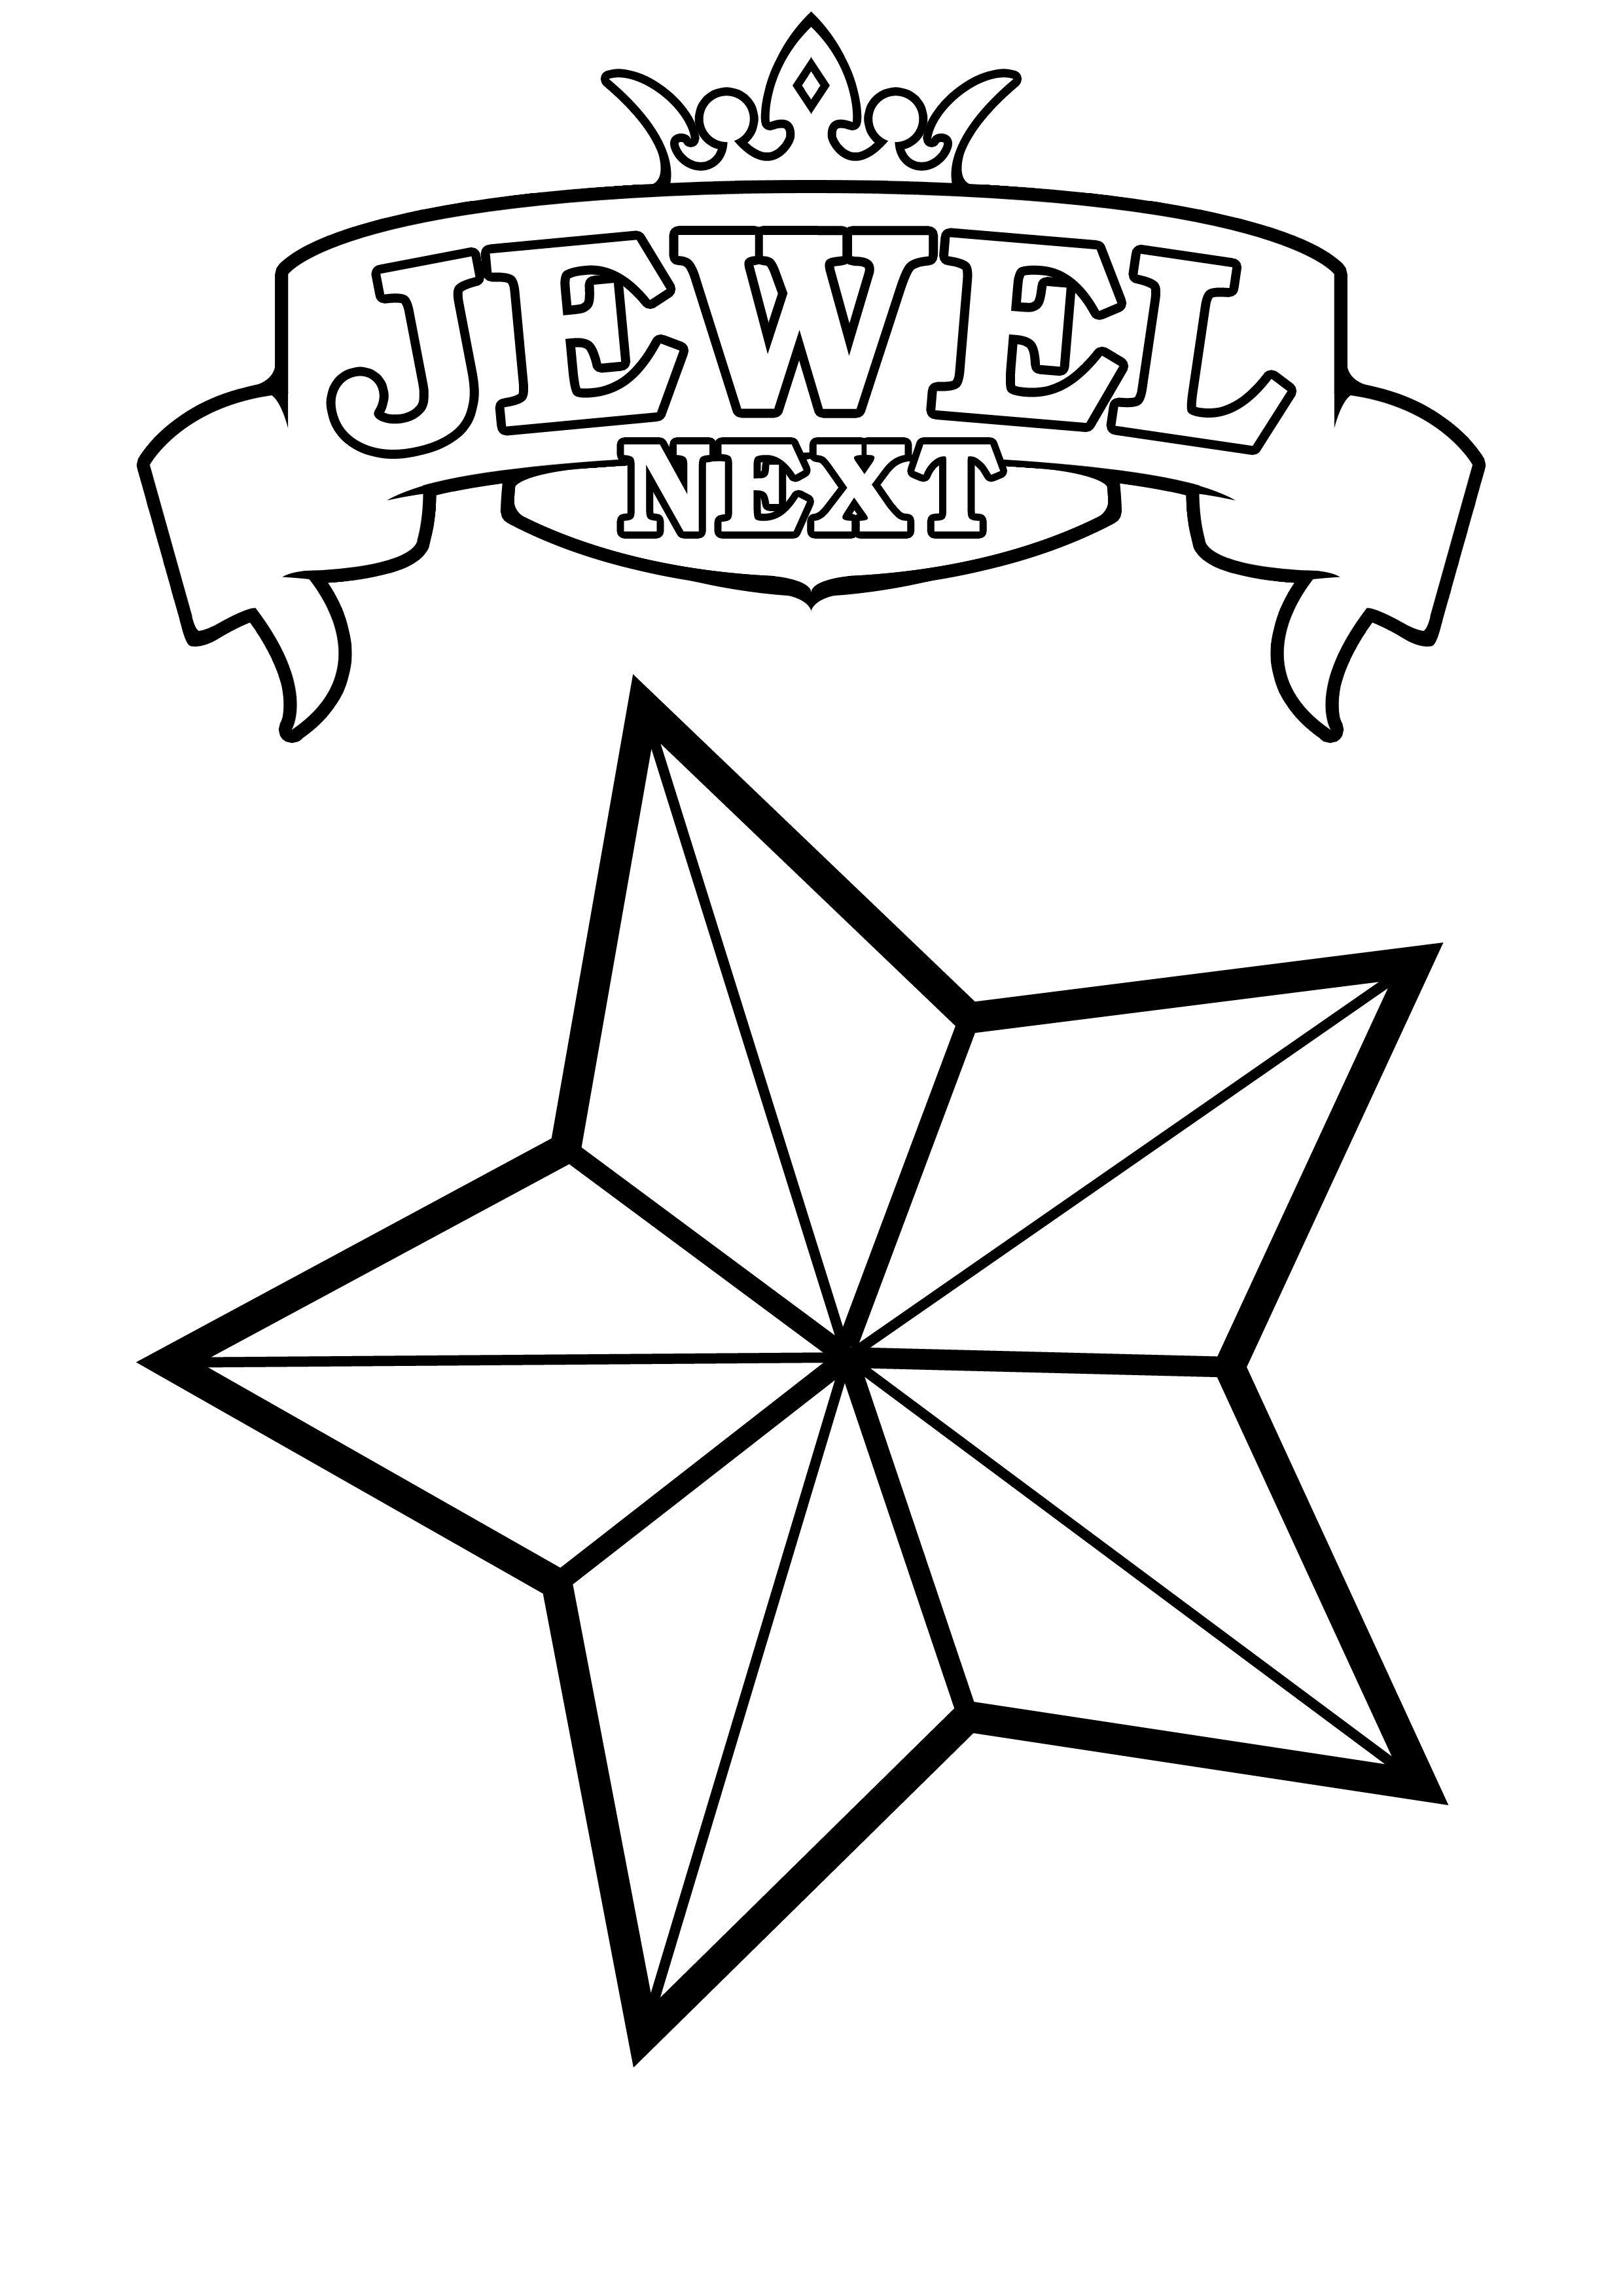  Stars Coloring Pages Jewel Next | Print Coloring Pages